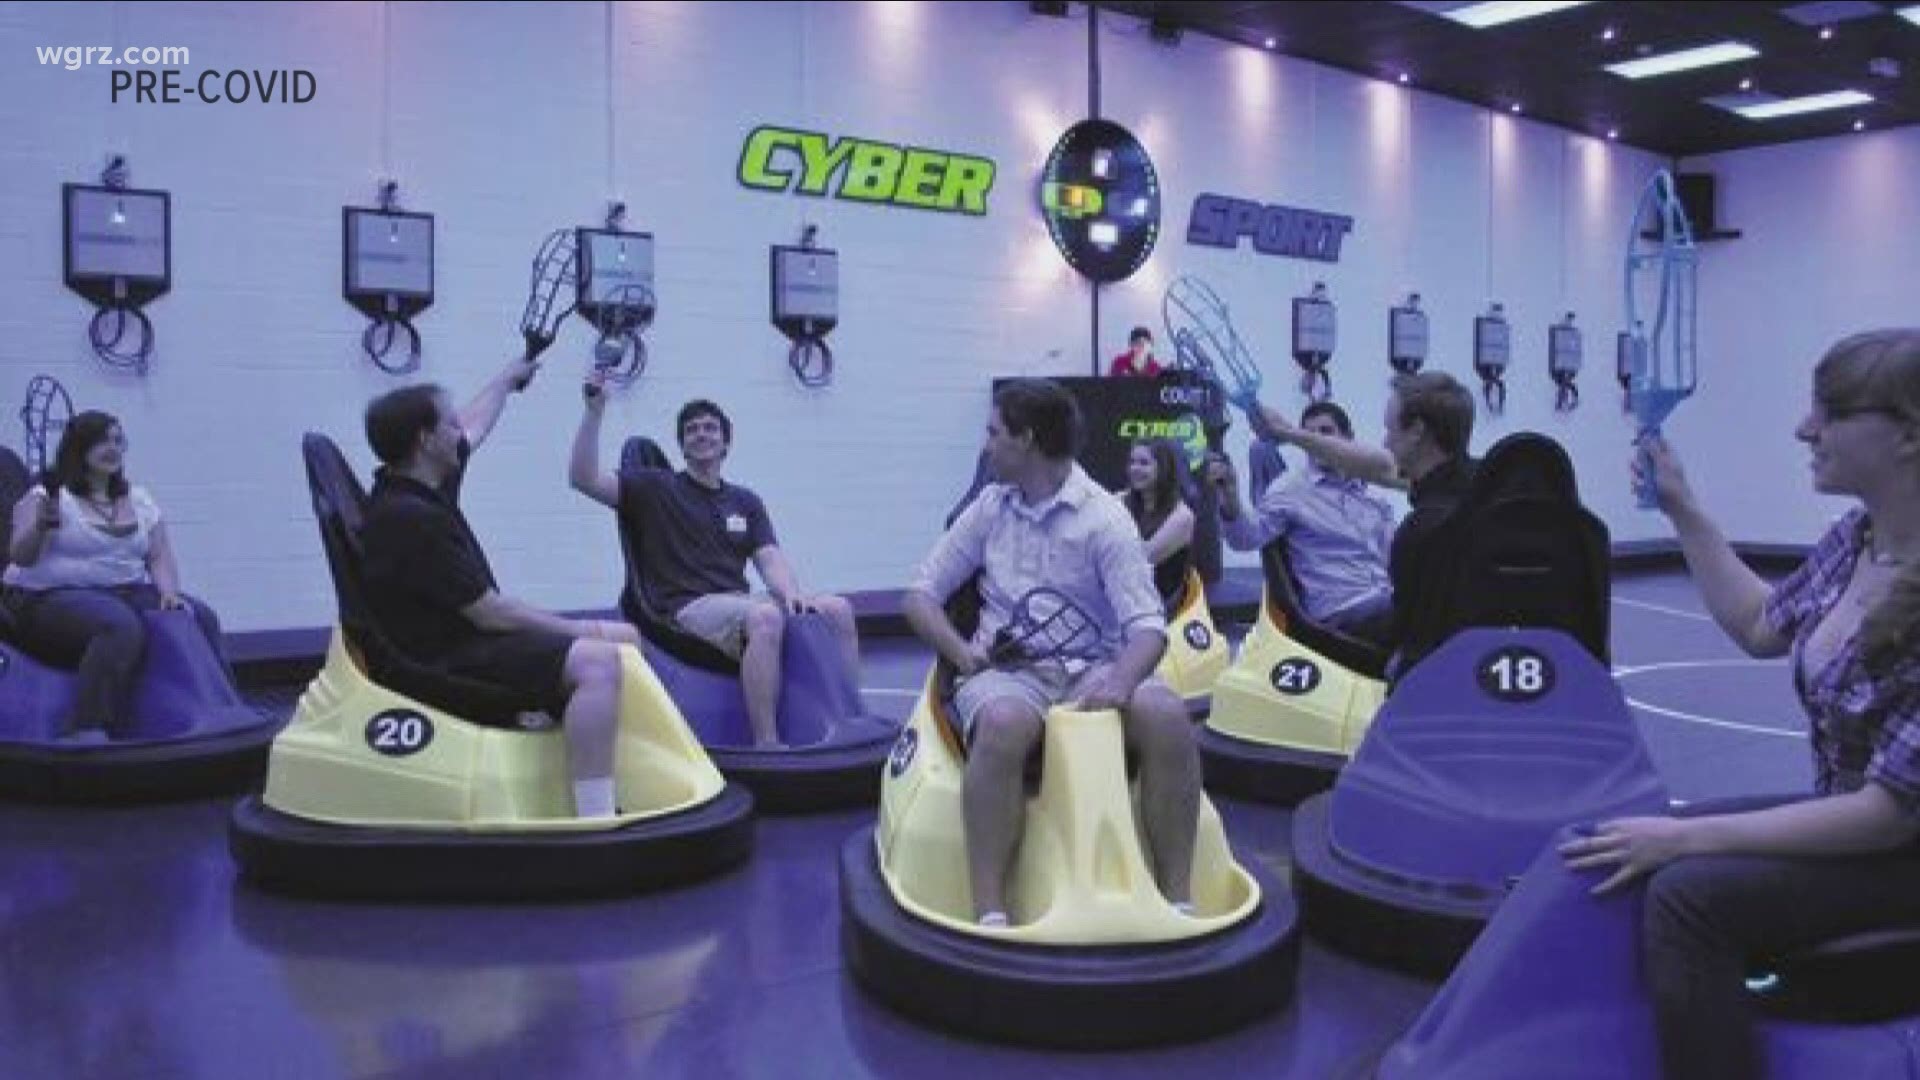 Indoor family entertainment, amusement venues are now open